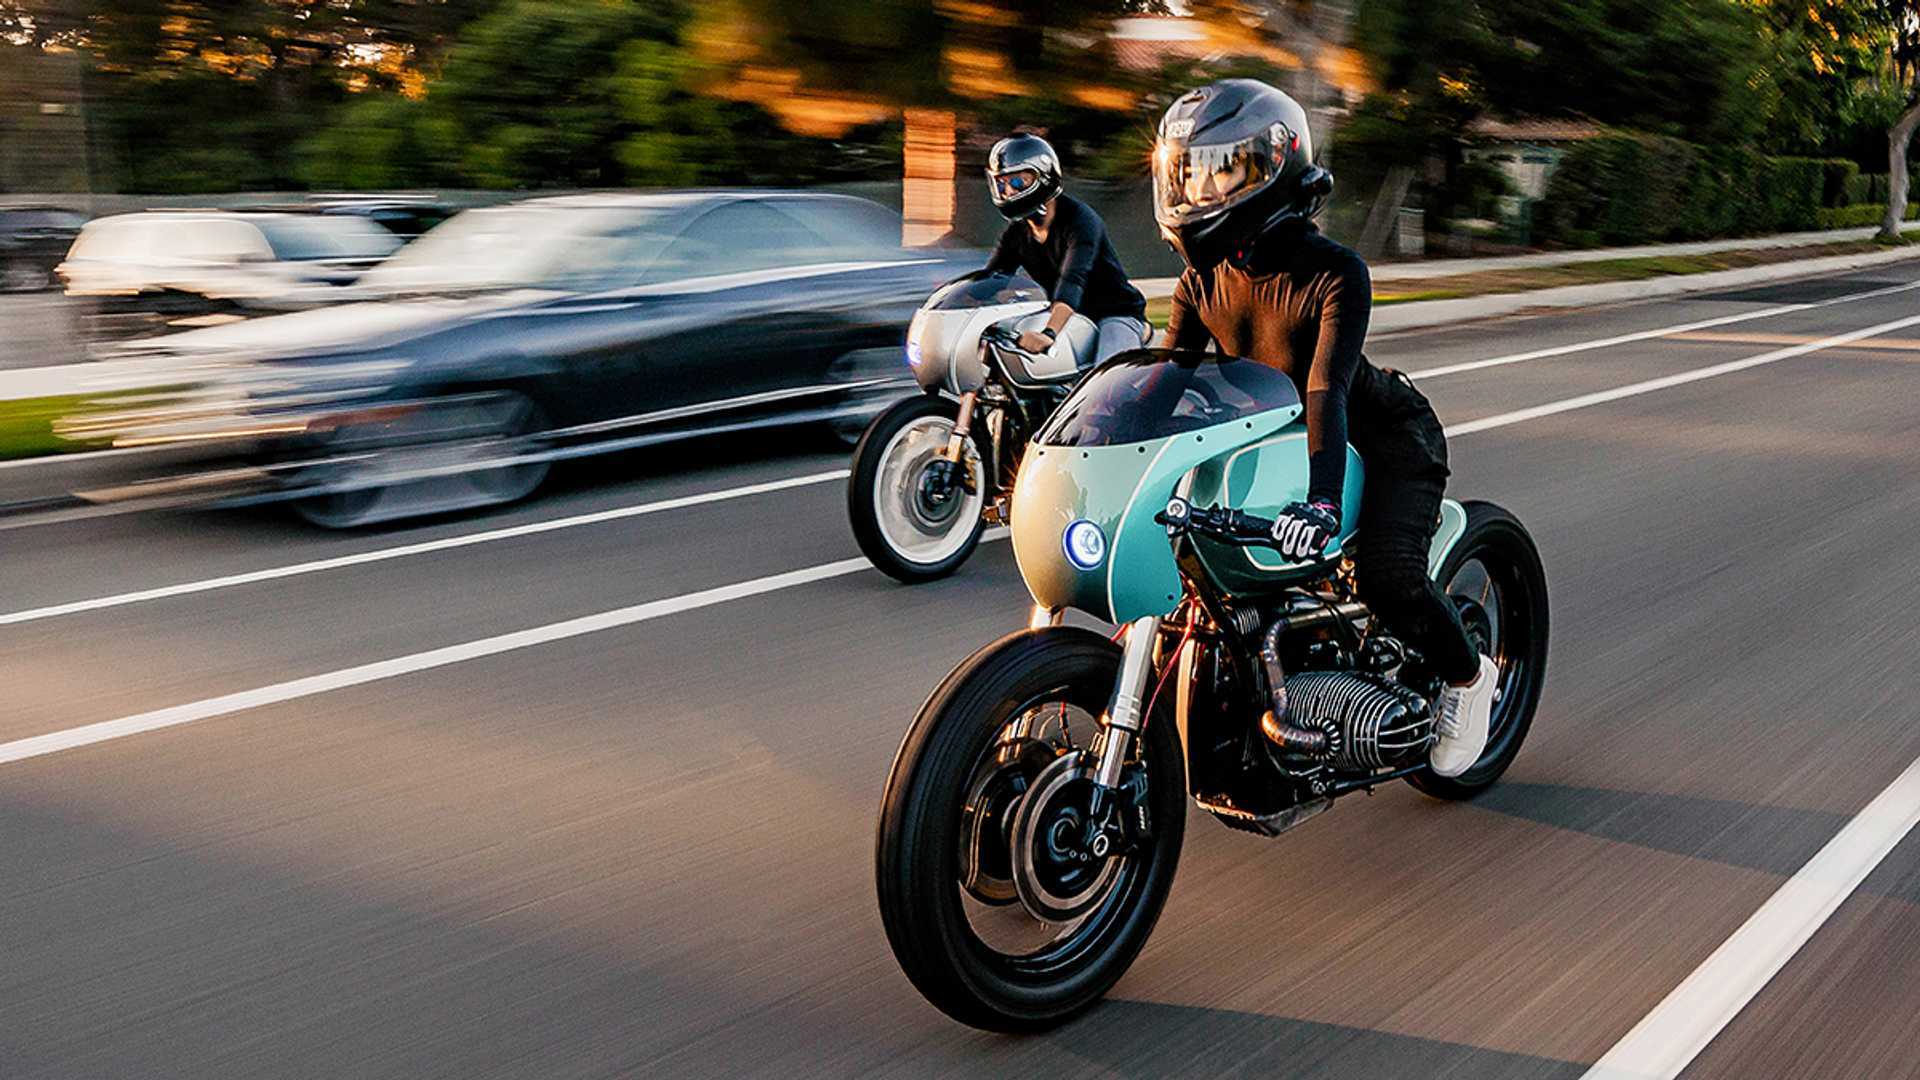 Motorcycle Monday: Enter To Win These BMW Café Racers